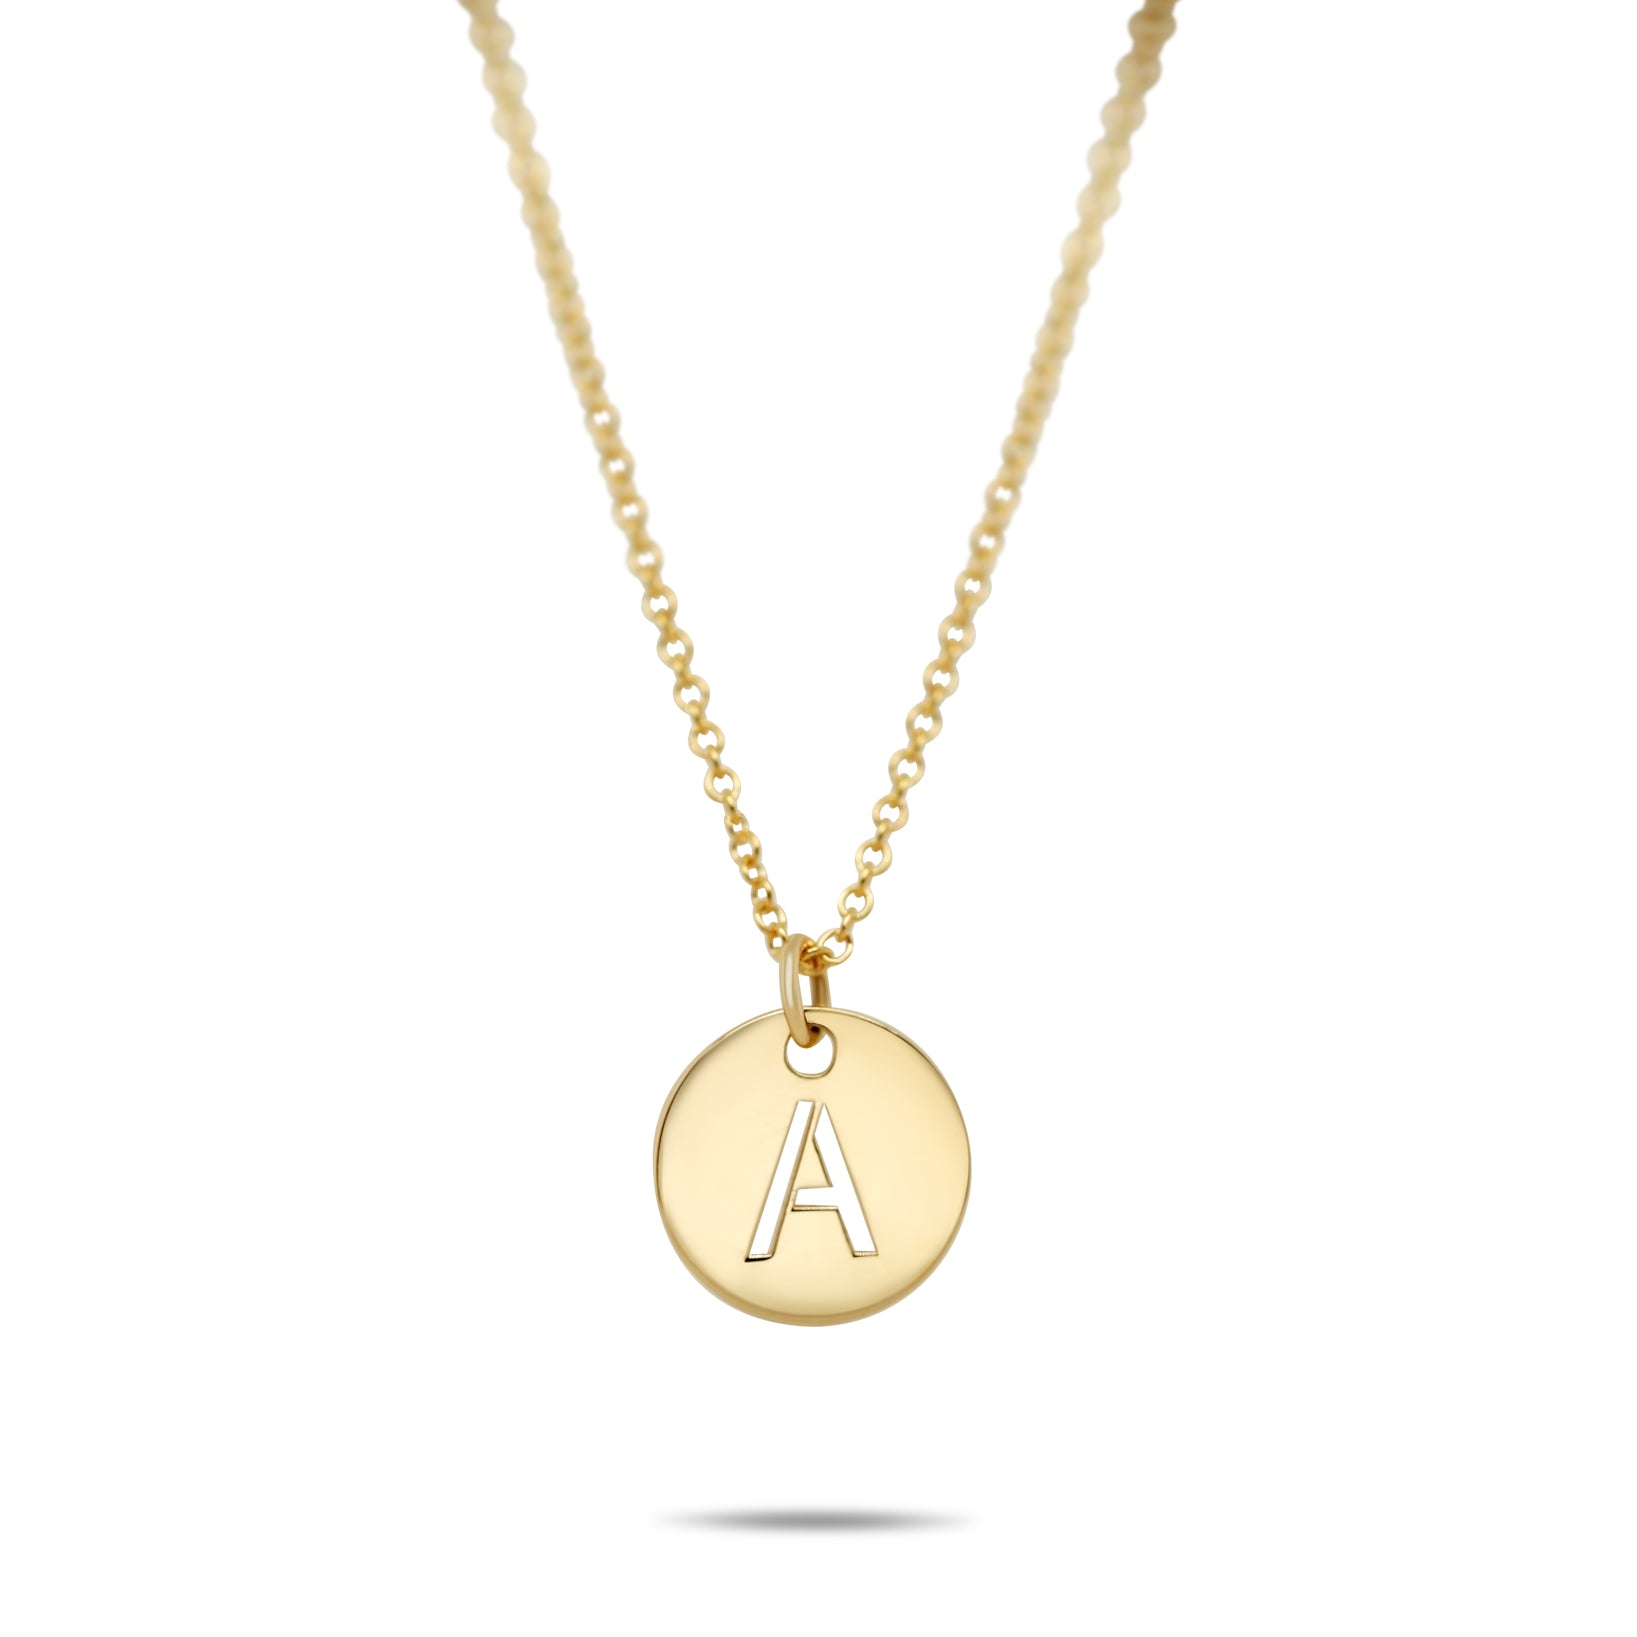 14k gold disc charm necklace with engraved initial personalization